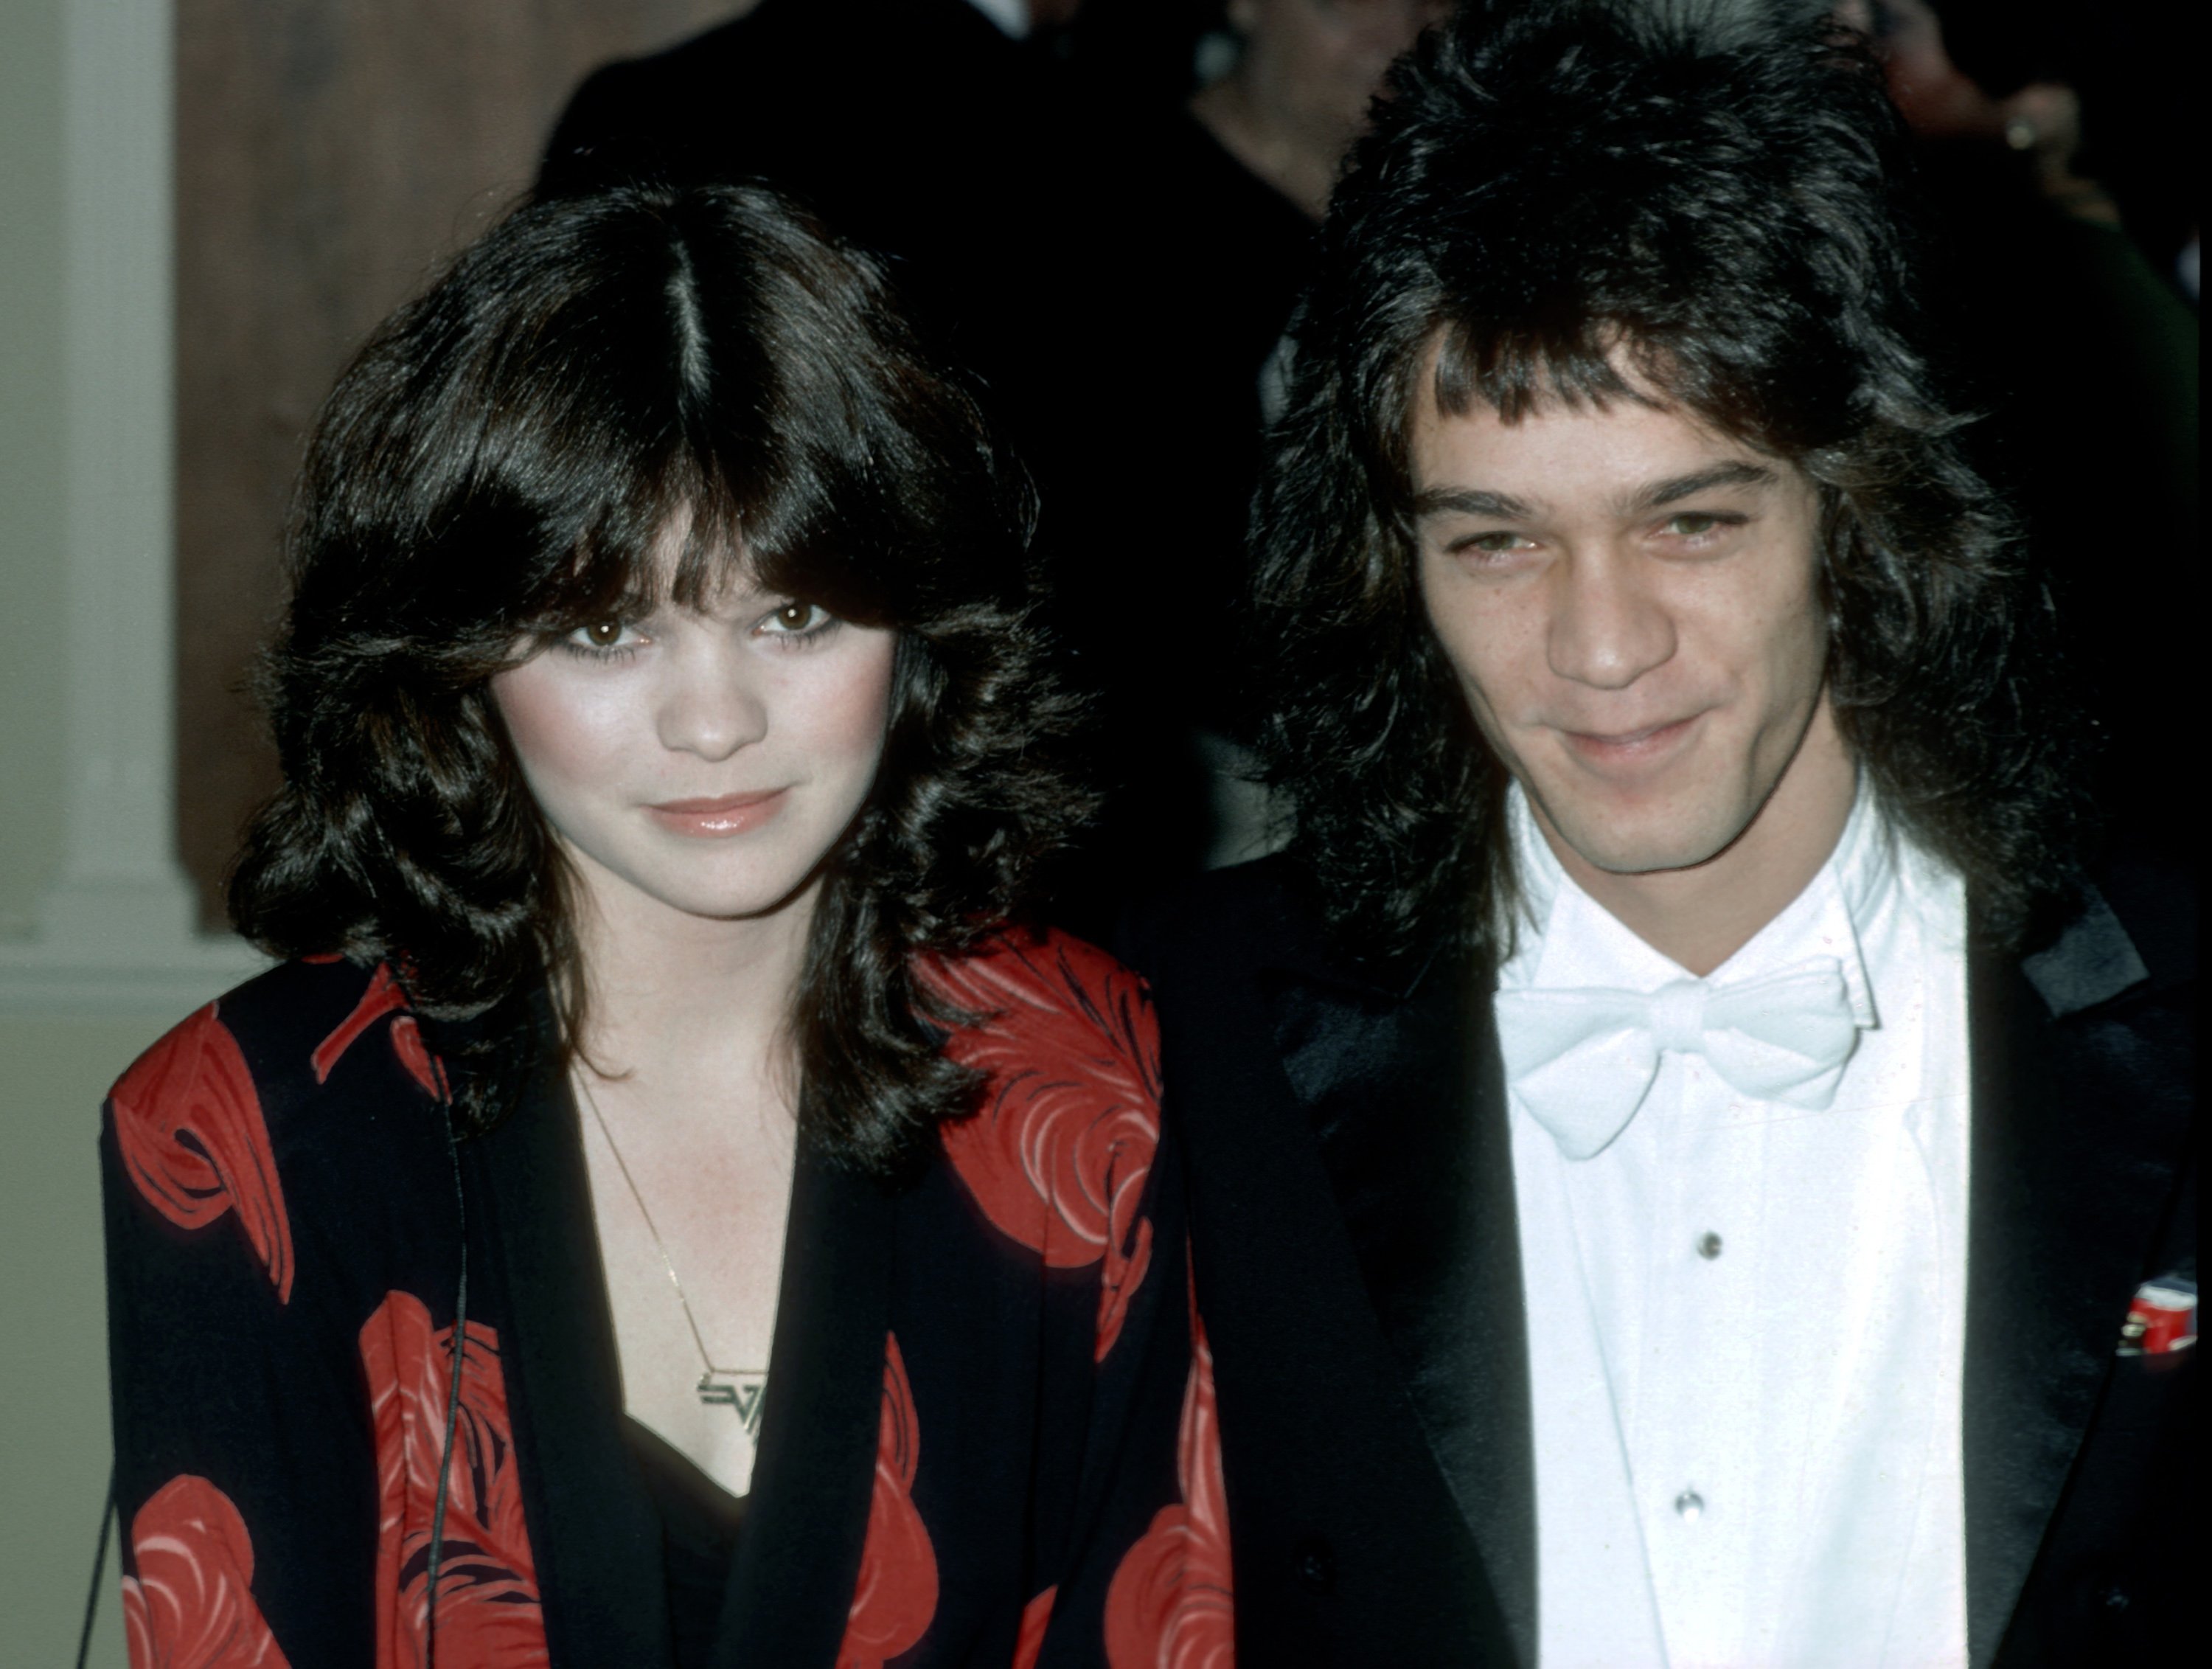 Valerie Bertinelli and Eddie Van Halen during the 38th Annual Golden Globe Awards in Beverly Hills, California, on January 31, 1981| Source: Getty Images